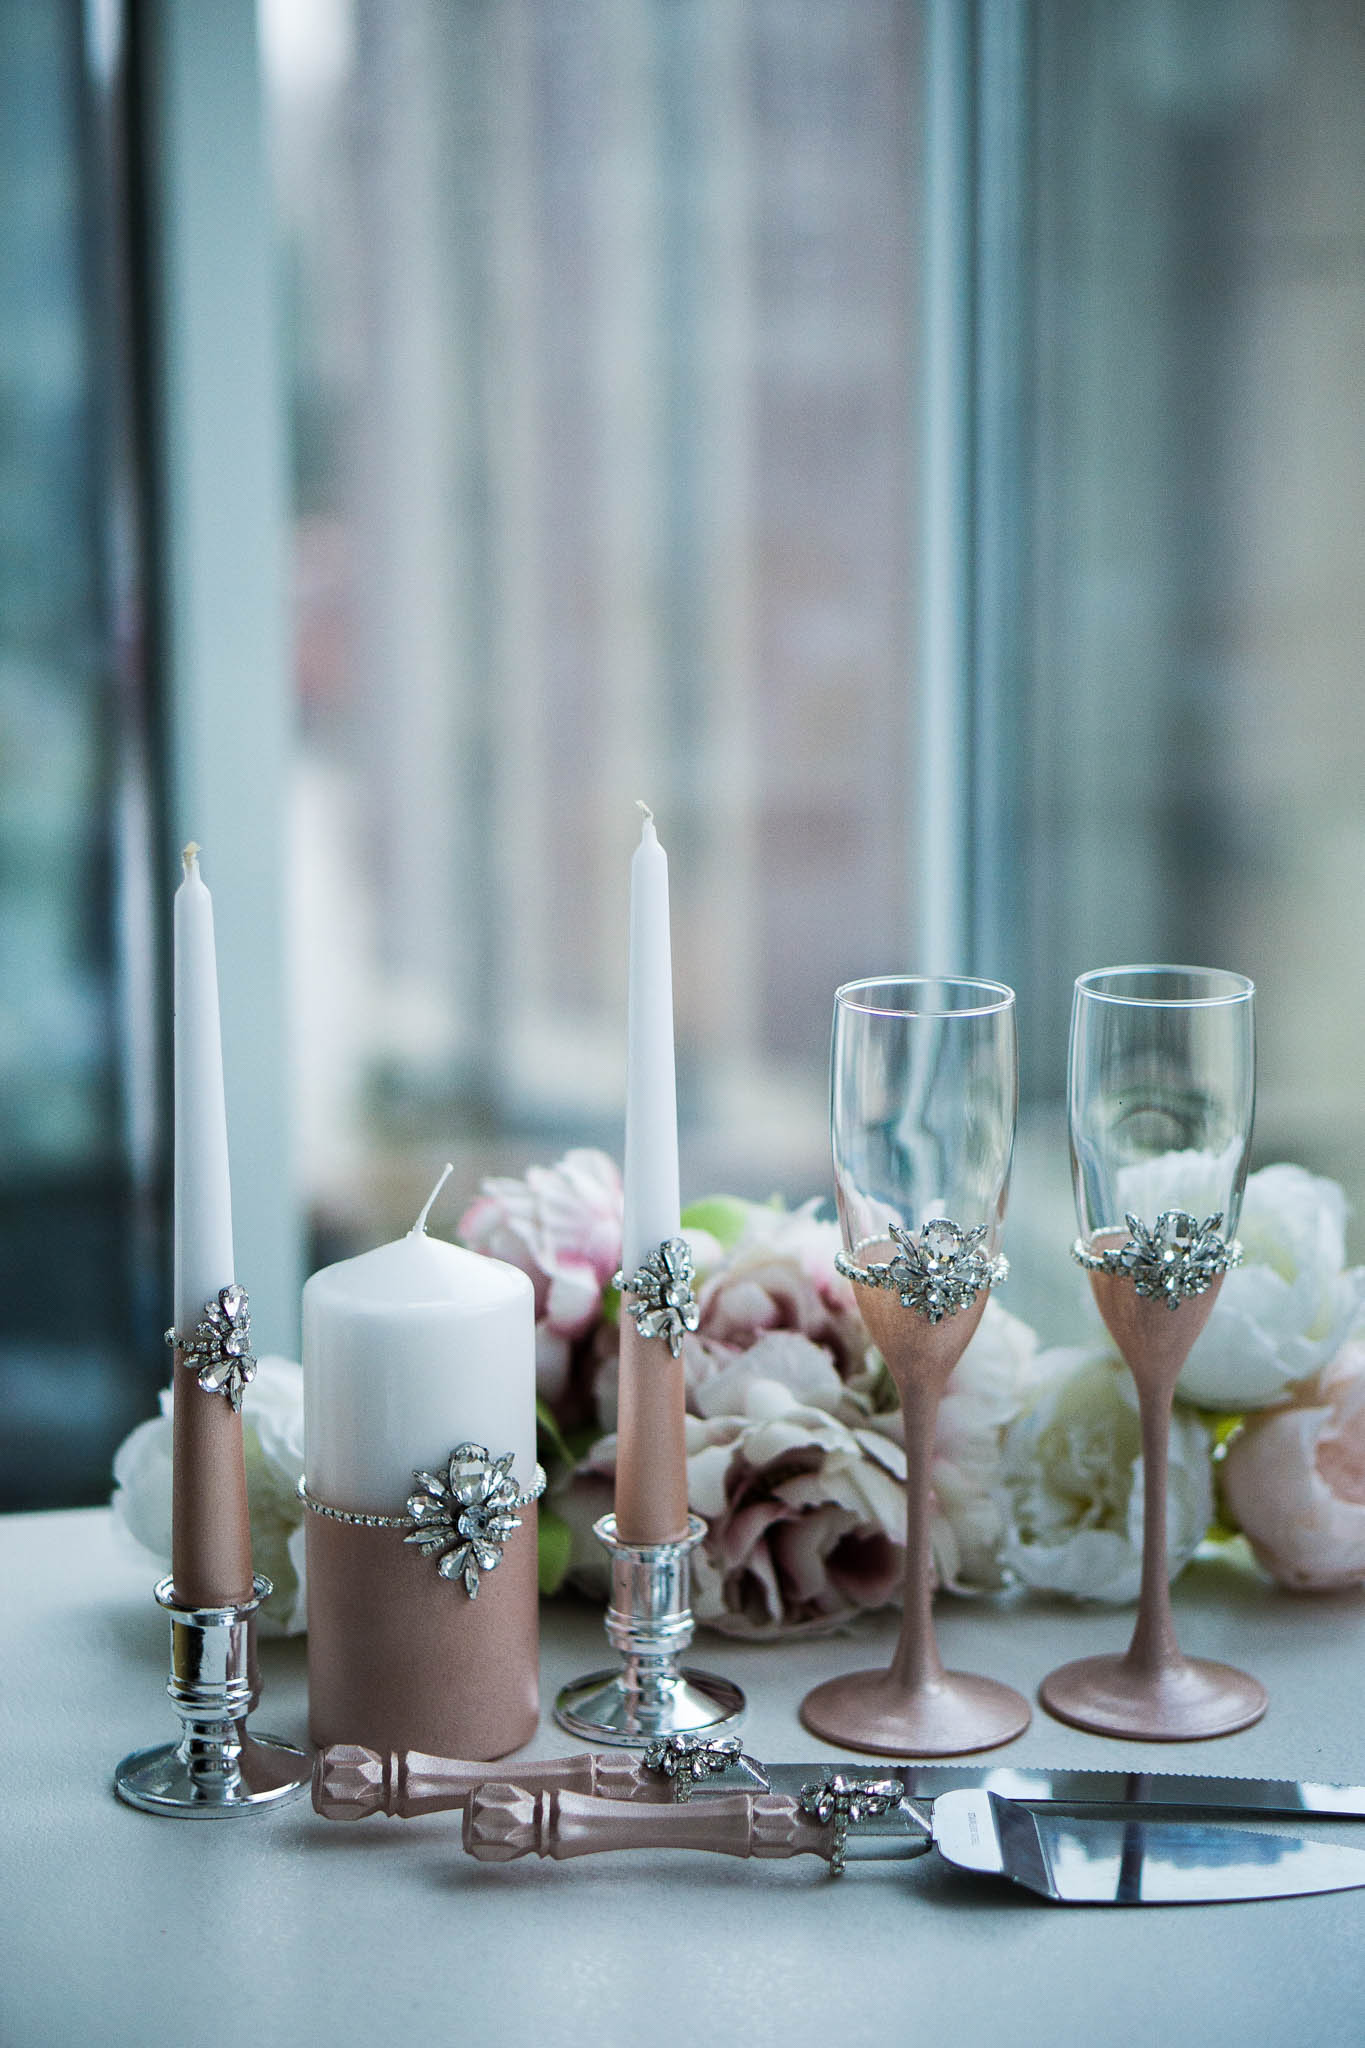 Rose gold unity candles, crafted for a bespoke wedding experience.